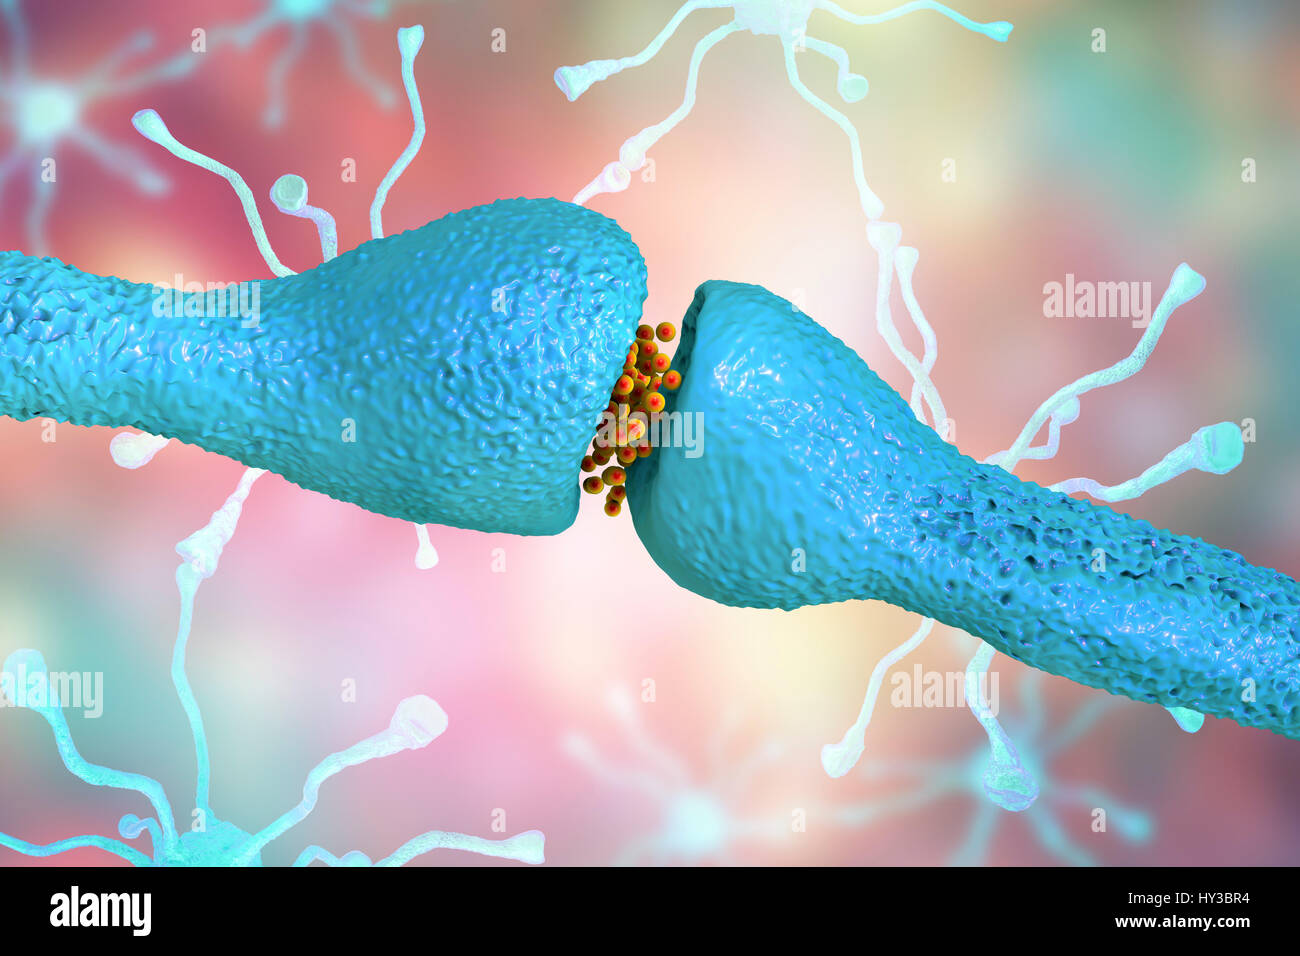 Nerve synapse. Computer illustration of a junction, or synapse, between two nerve cells (neurons). As the electrical signal reaches the presynaptic end of a neuron it triggers the release of neurotransmitters across the gap, or synaptic cleft, between the two cells. The neurotransmitters bind to receptors on the postsynaptic membrane, changing the membrane's excitability and triggering an electrical impulse. Stock Photo